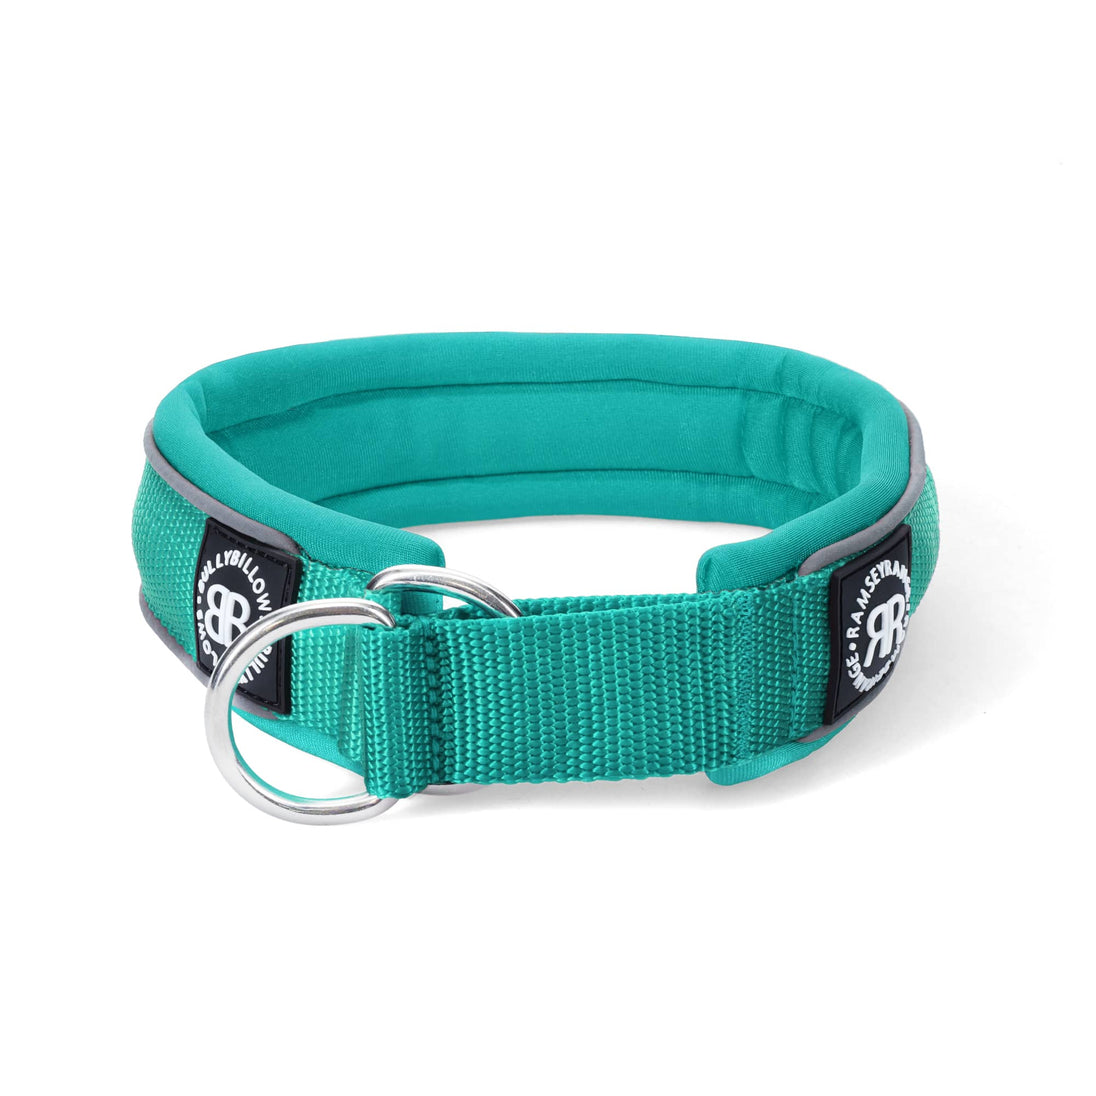 BULLY BILLOWS - 4CM RAMSEY RANGE - TURQUOISE COLLAR (SERIES 2) - Bulletproof Pet Products Inc